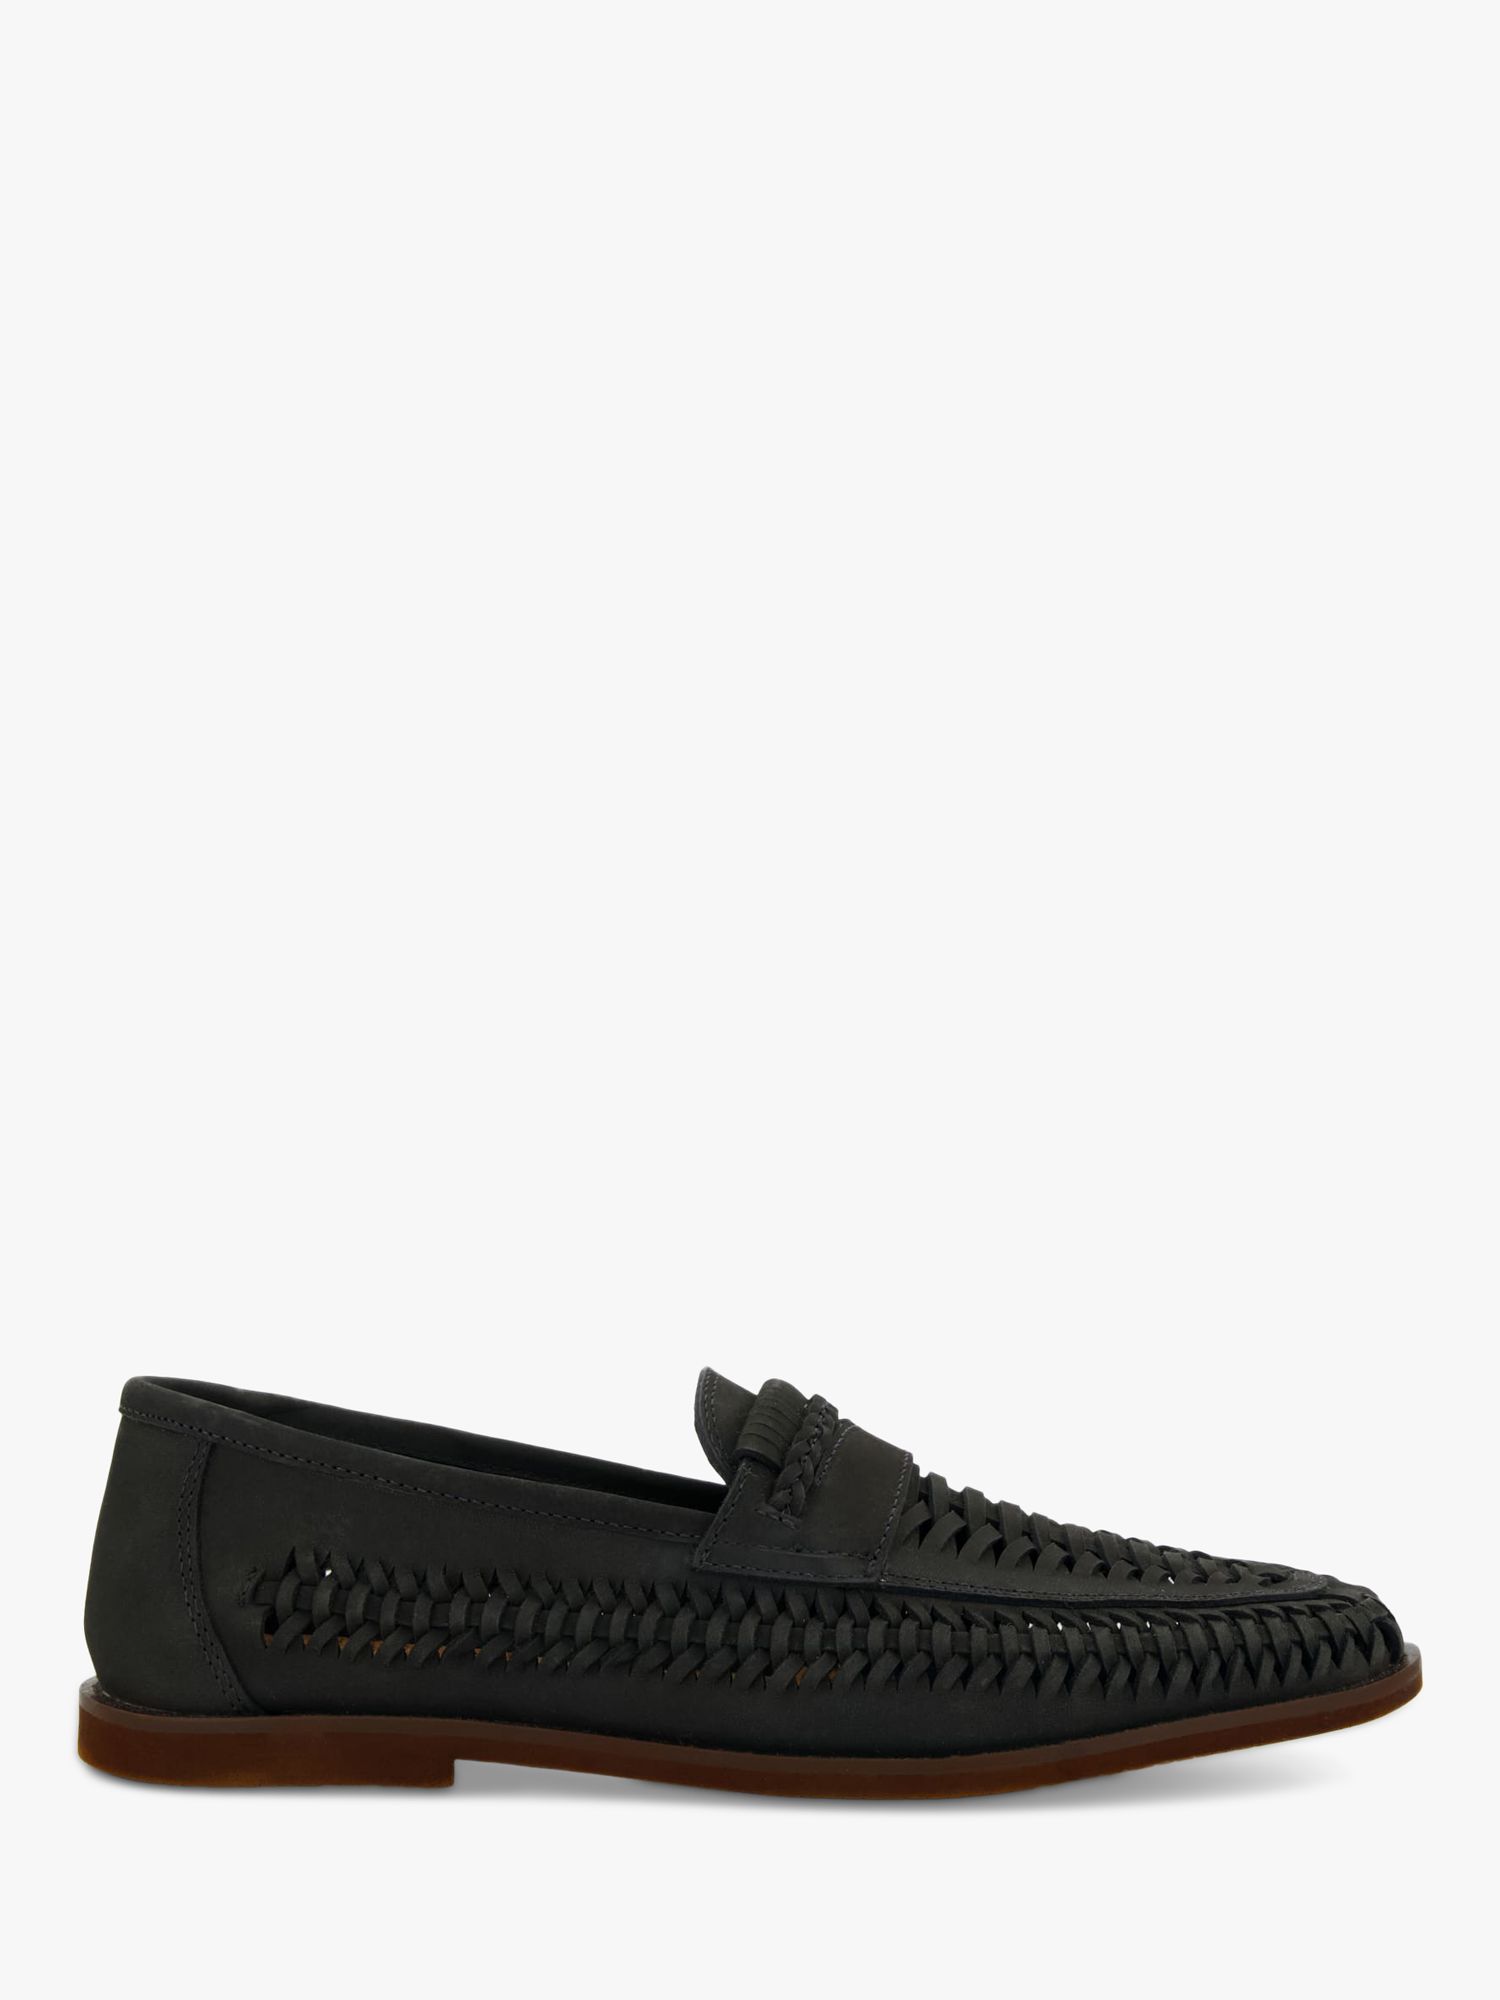 Dune Brickles Casual Woven Loafers, Dark Navy, 7